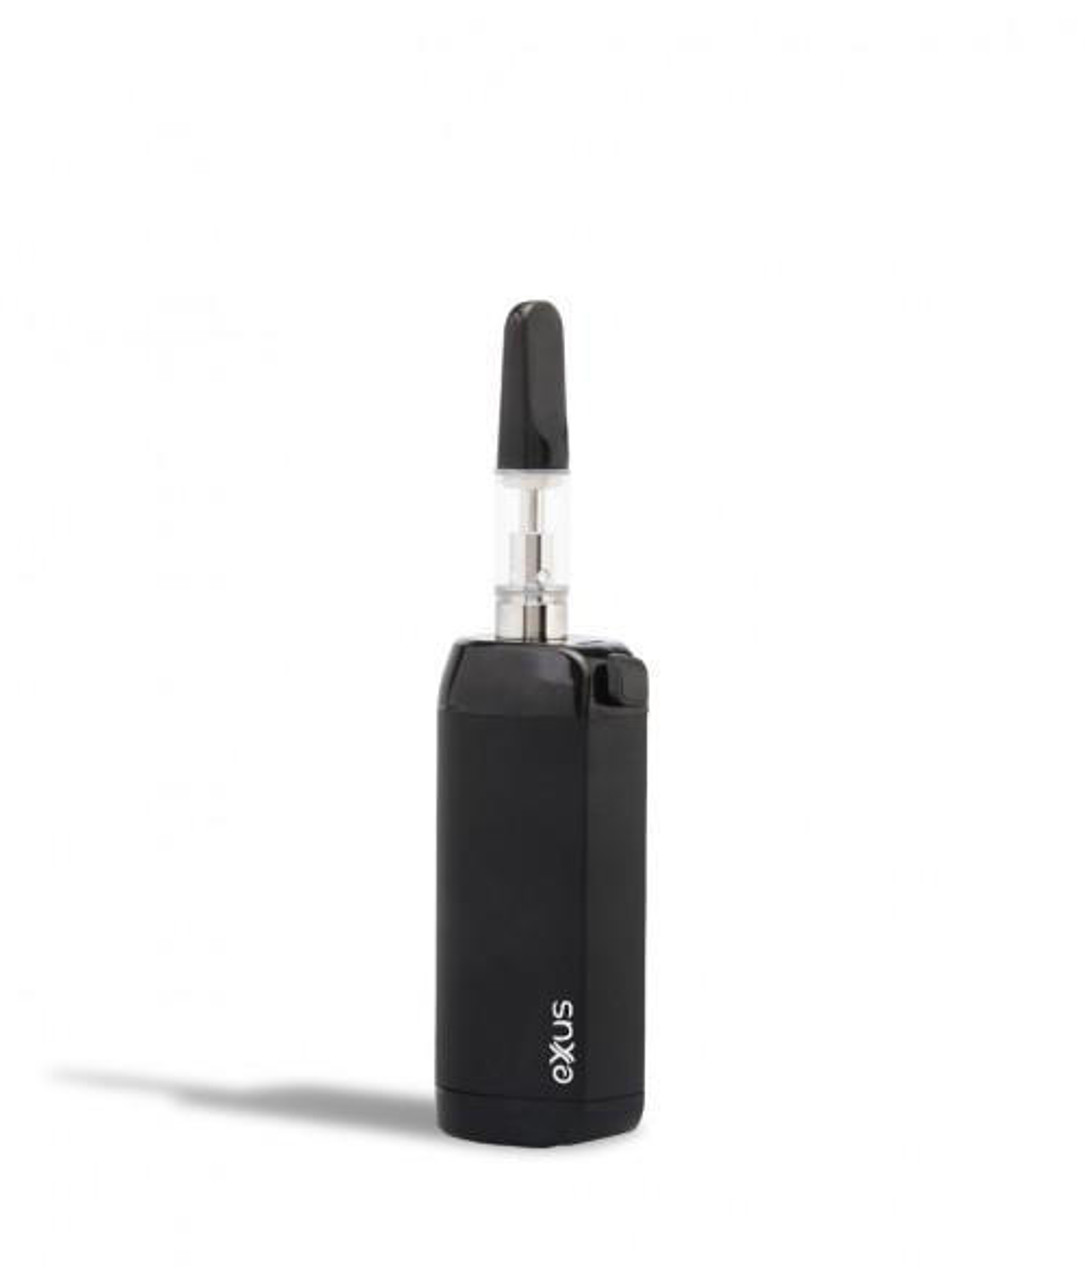 Exxus Go - Low Temperature Kit - Mouthpiece and Coil - Vapes